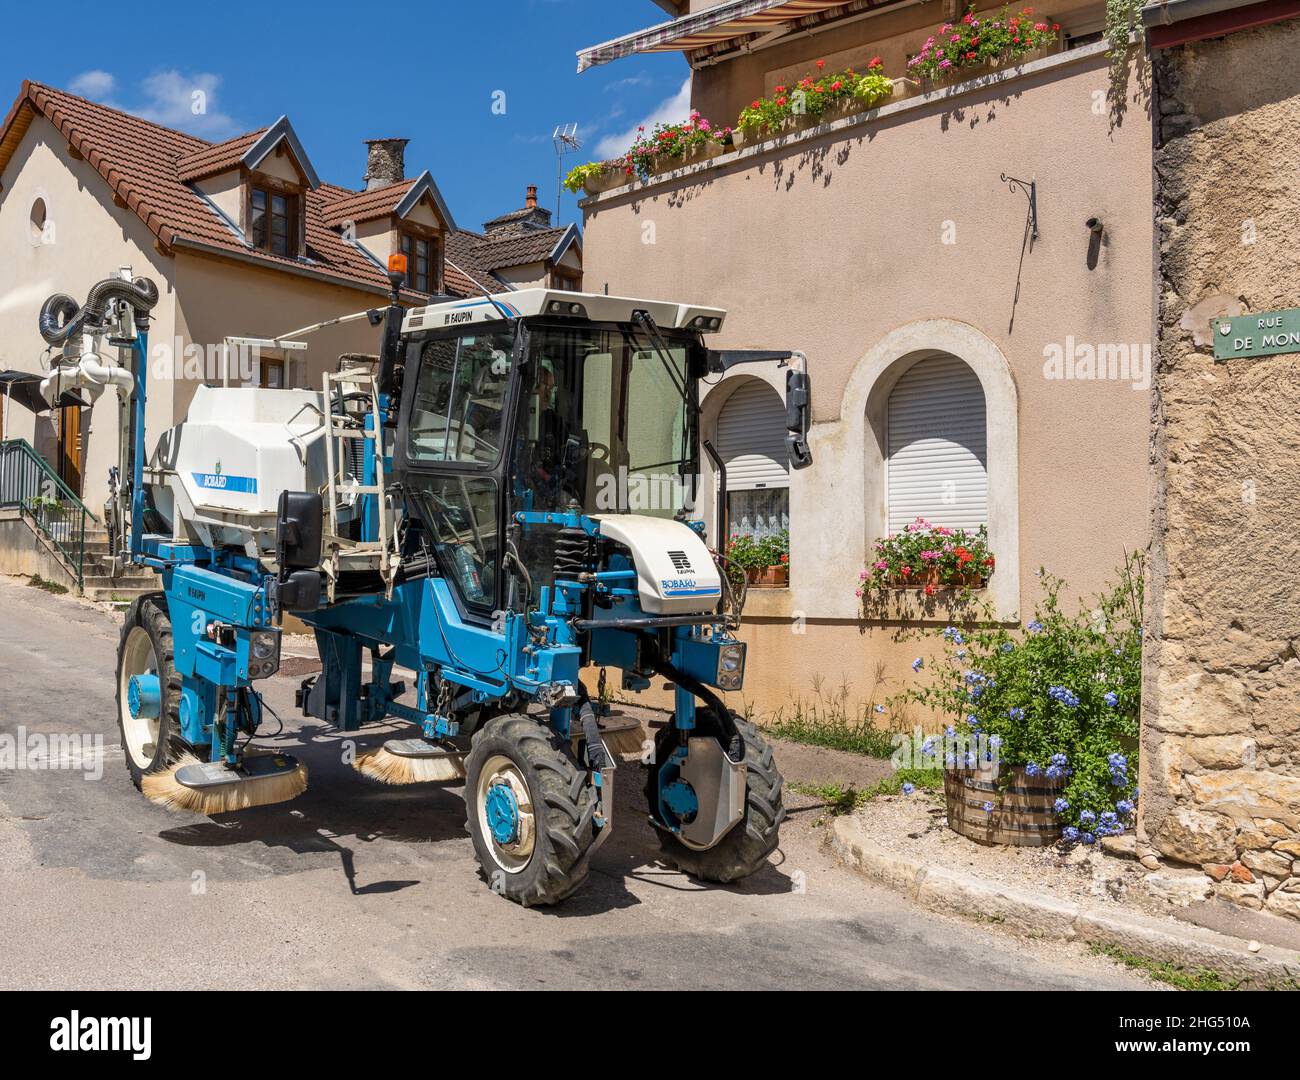 Volnay, France - June 30, 2020: Machine used on the vineyards in burgundy, France. Stock Photo